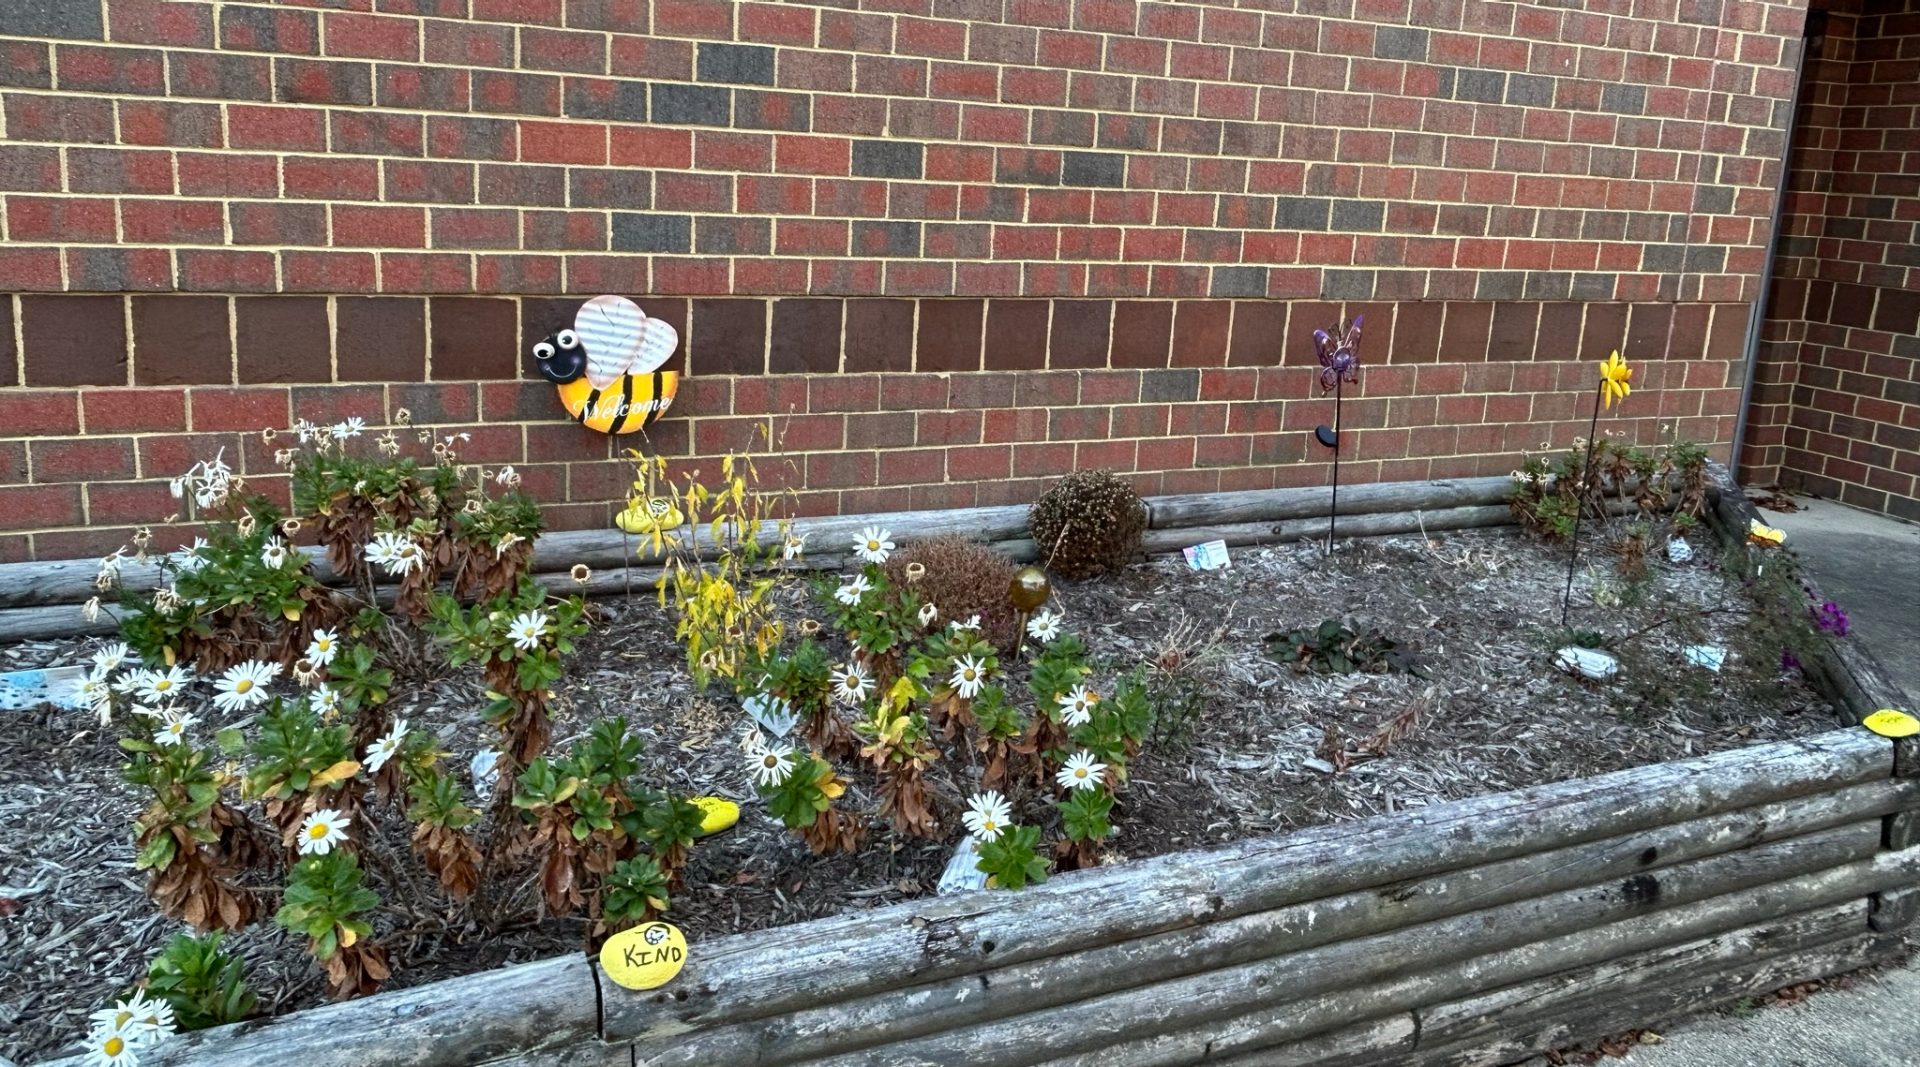  Pollinator garden built by a Girl Scout as part of a highest award project 